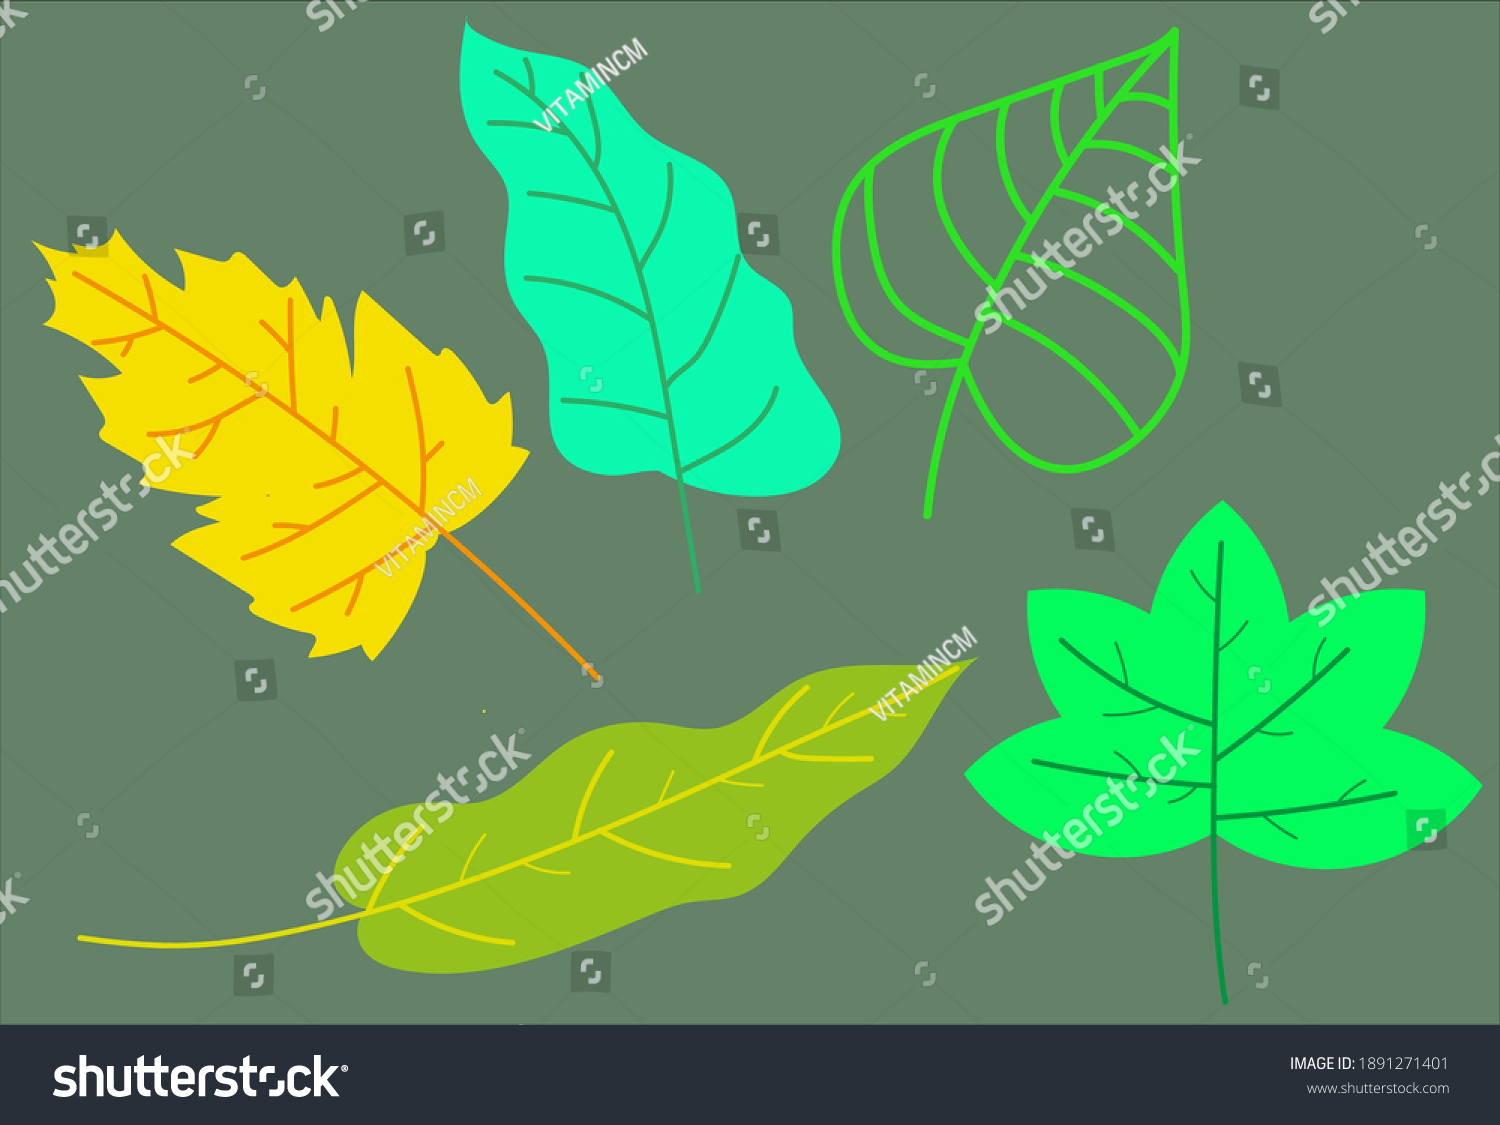 five-types-leaf-shapes-bakgrounds-templates-stock-vector-royalty-free